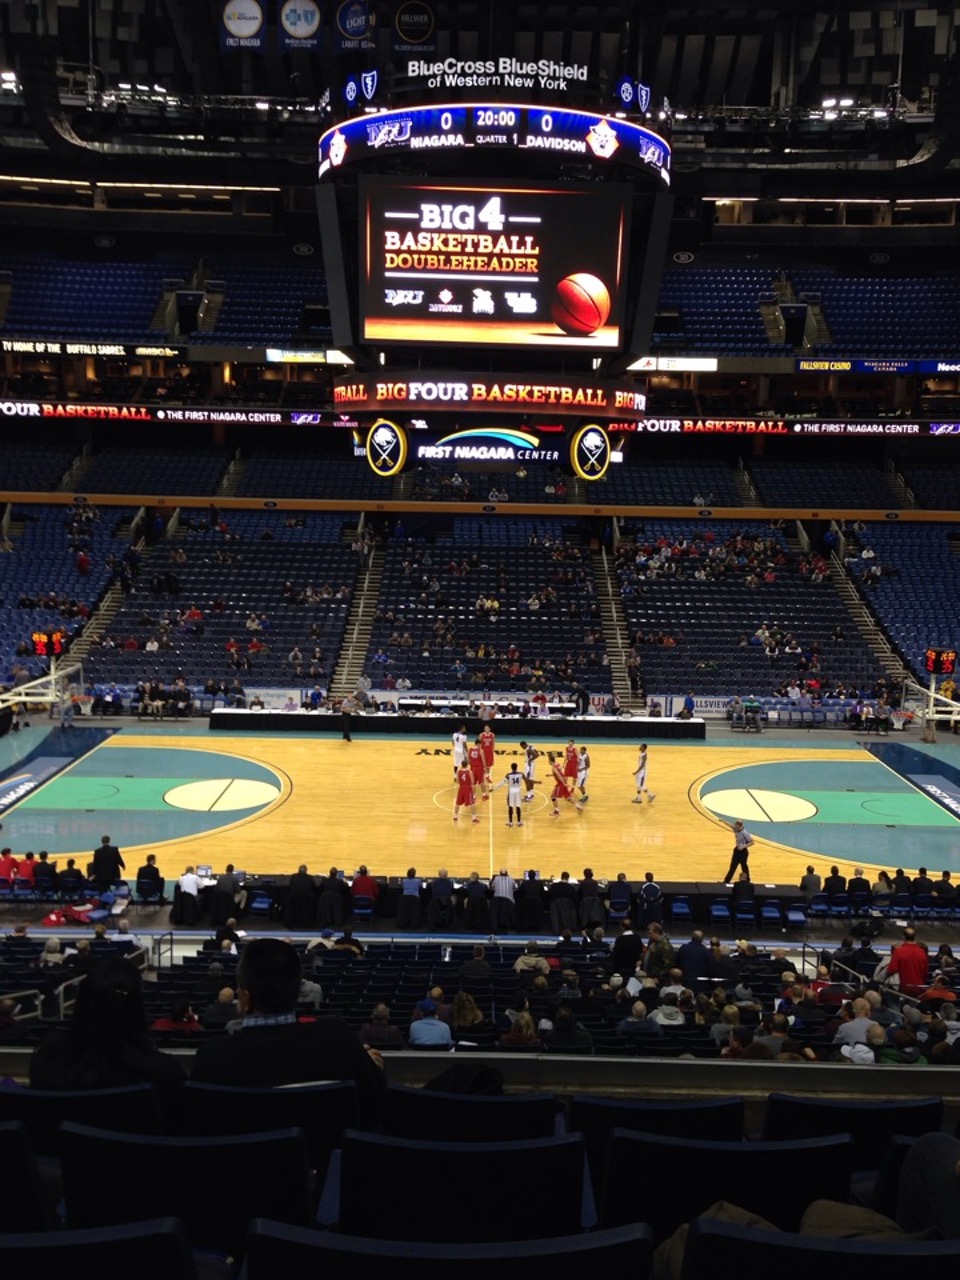 section 218, row 4 seat view  for basketball - keybank center